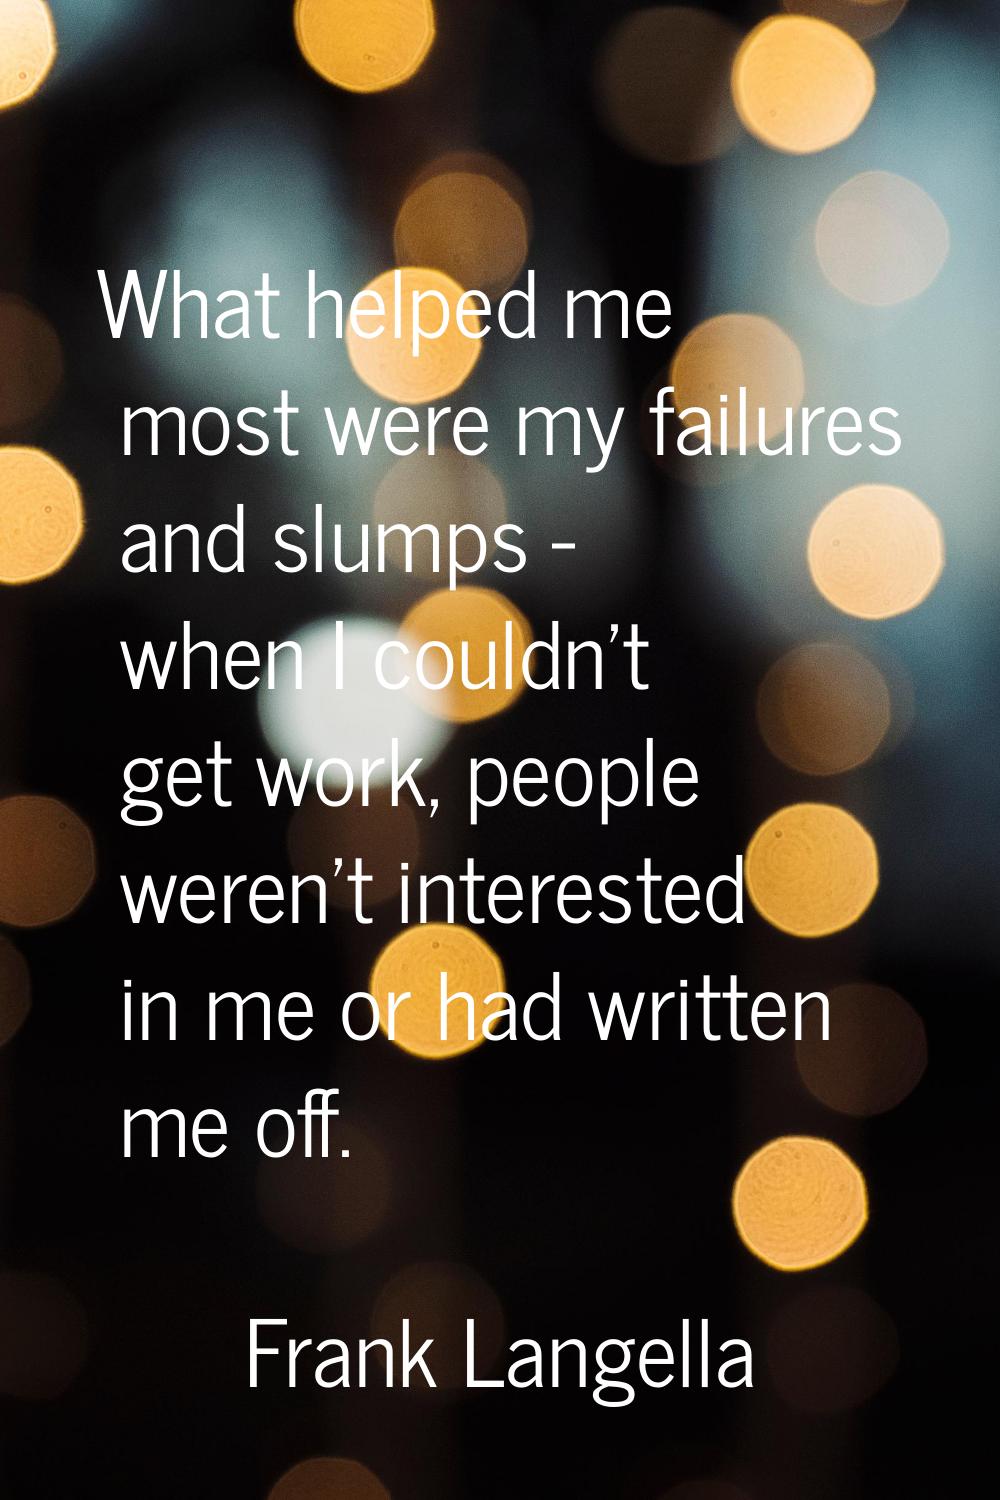 What helped me most were my failures and slumps - when I couldn't get work, people weren't interest